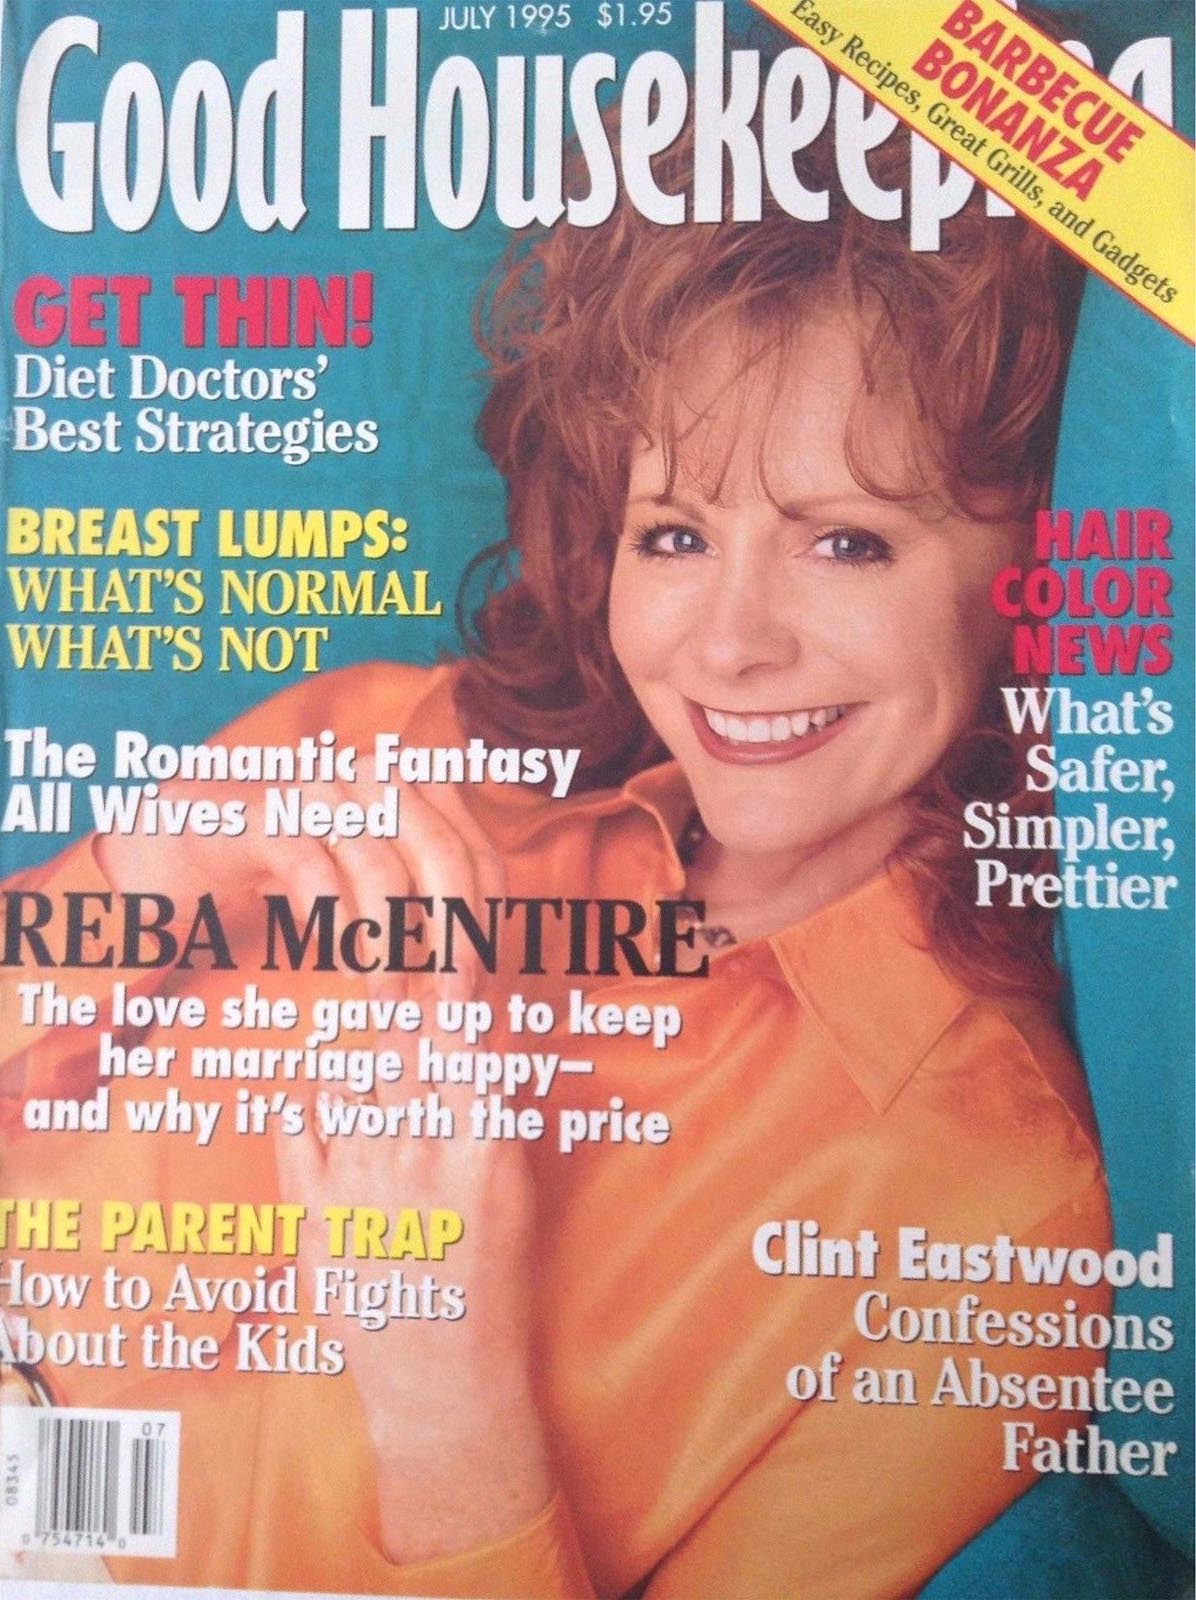 Good Housekeeping July 1995 magazine back issue Good Housekeeping magizine back copy Good Housekeeping July 1995 American womens magazine Back Issue Published by Hearst Publishing Corporation. Covergirl Reba McEntire.